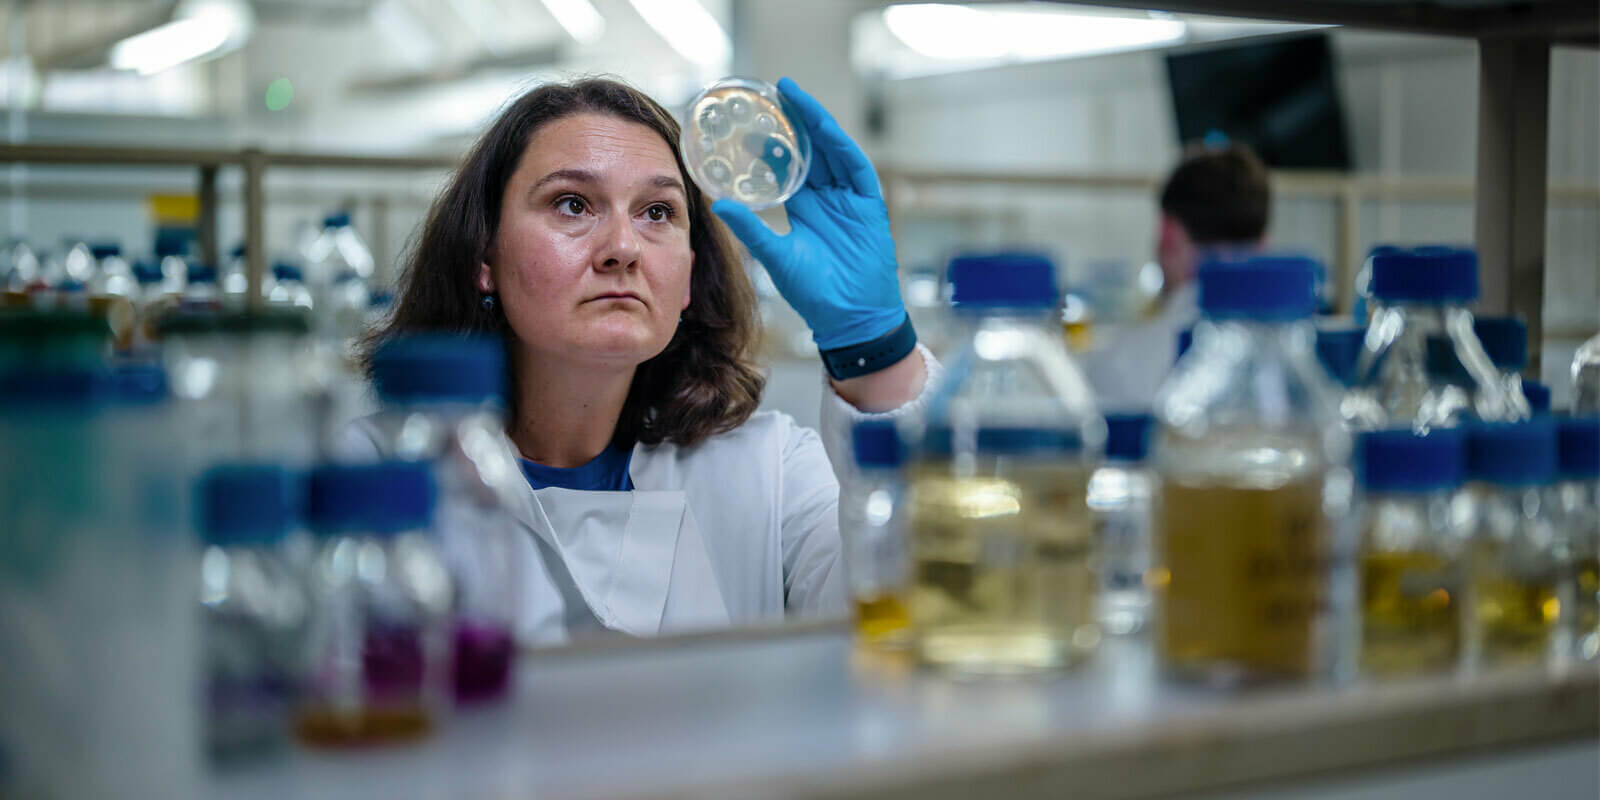 Martha Martins in her lab coat looking at a petri dish she's holding up.